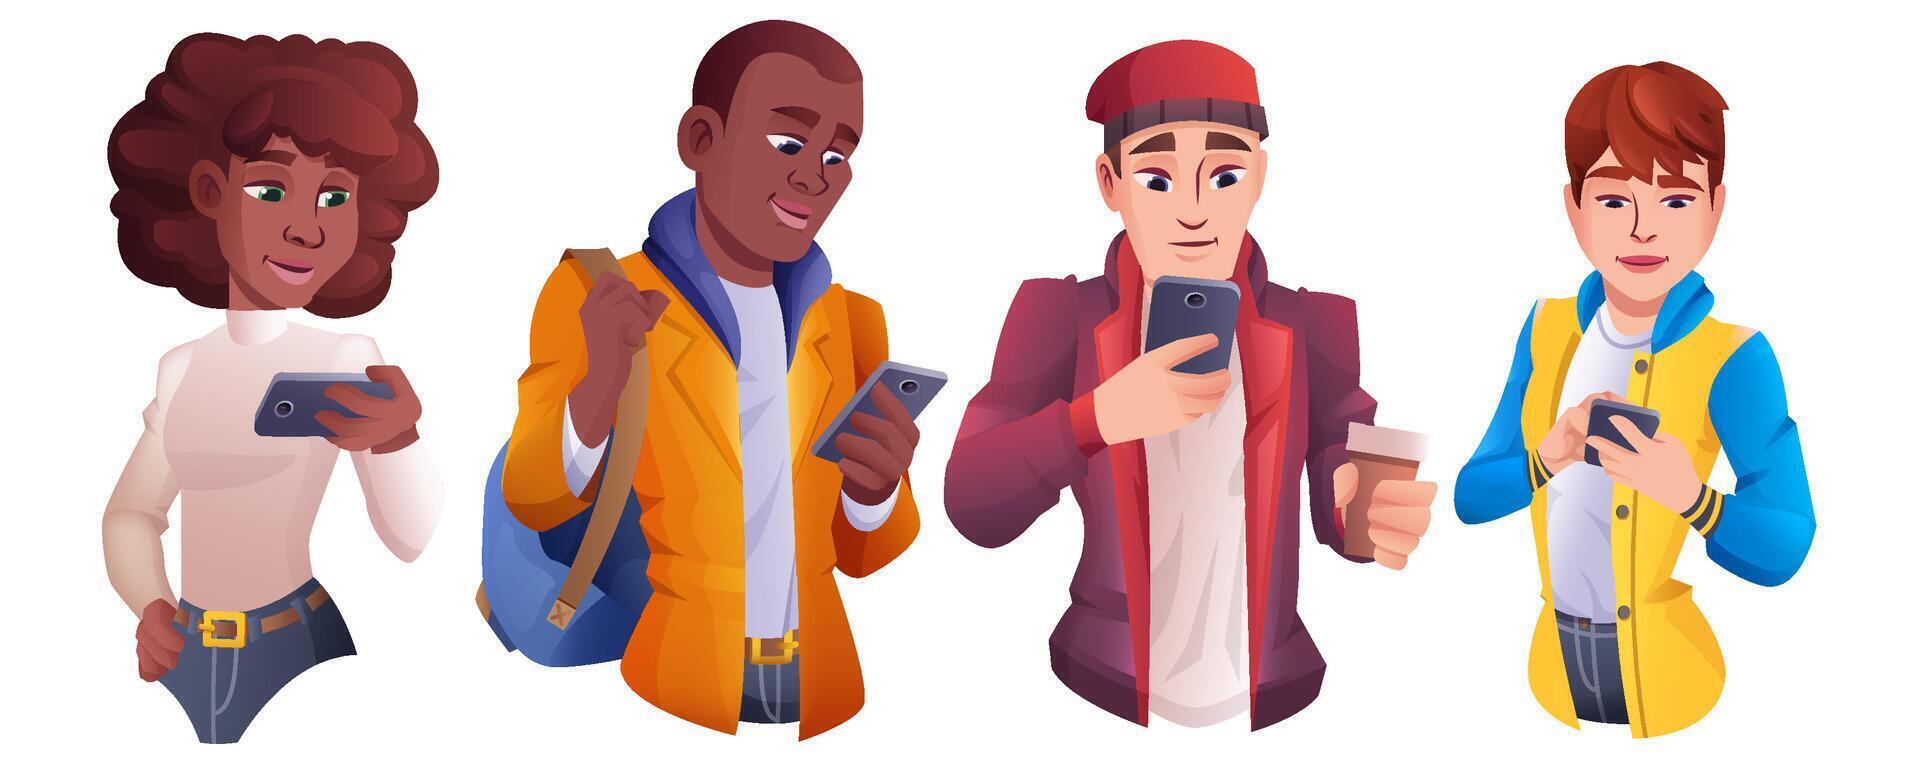 Cartoon group of people using smartphone. Men and women different nationalities holding mobile phone and chatting, typing messages. Young characters looking on gadgets. Online communication concept. vector